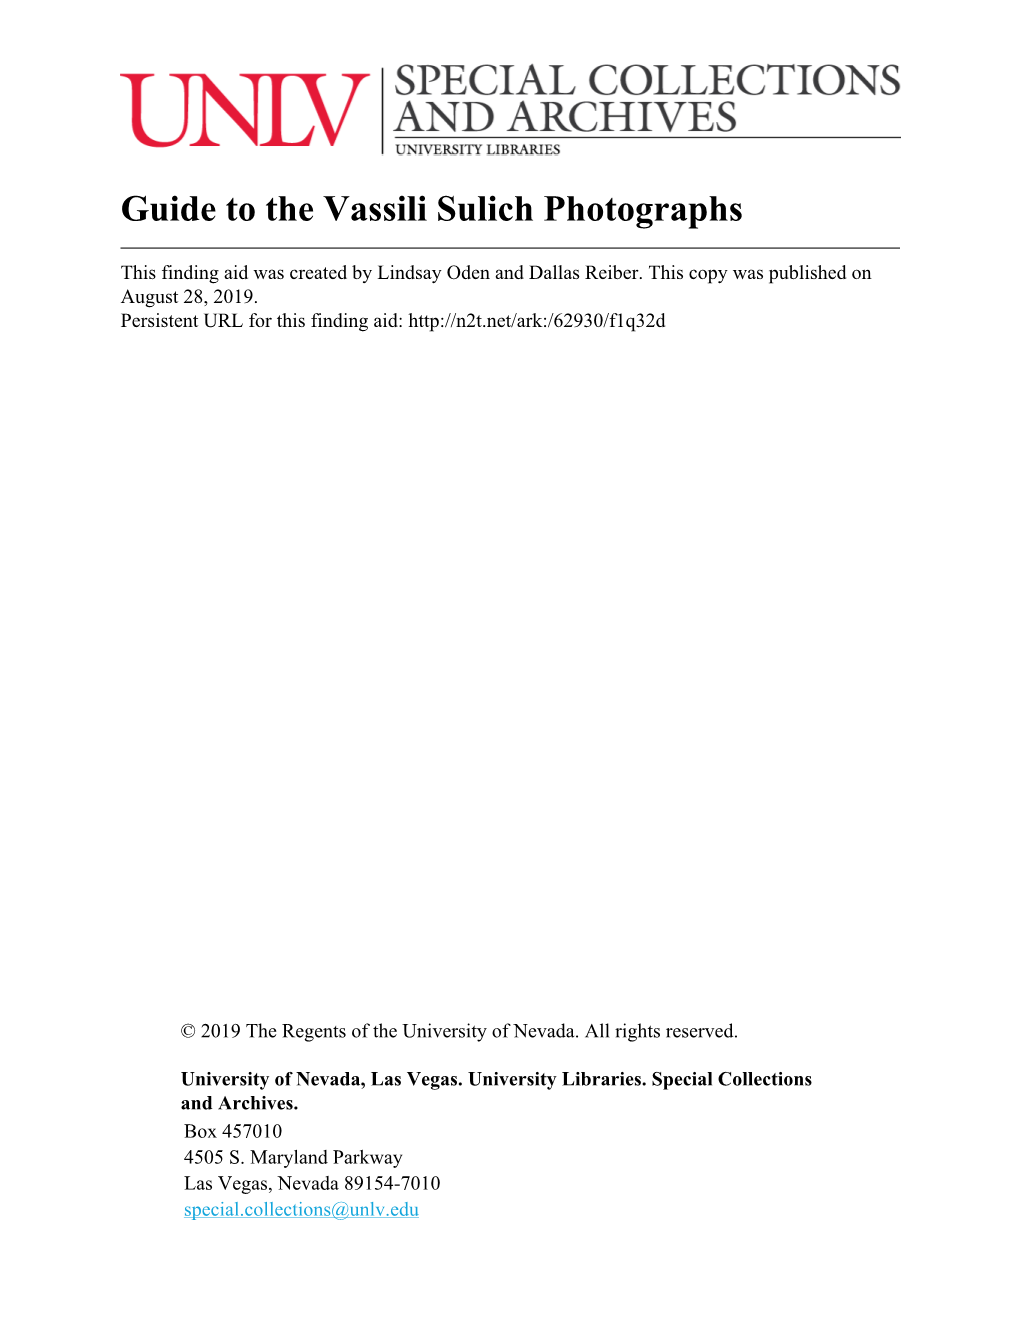 Guide to the Vassili Sulich Photographs